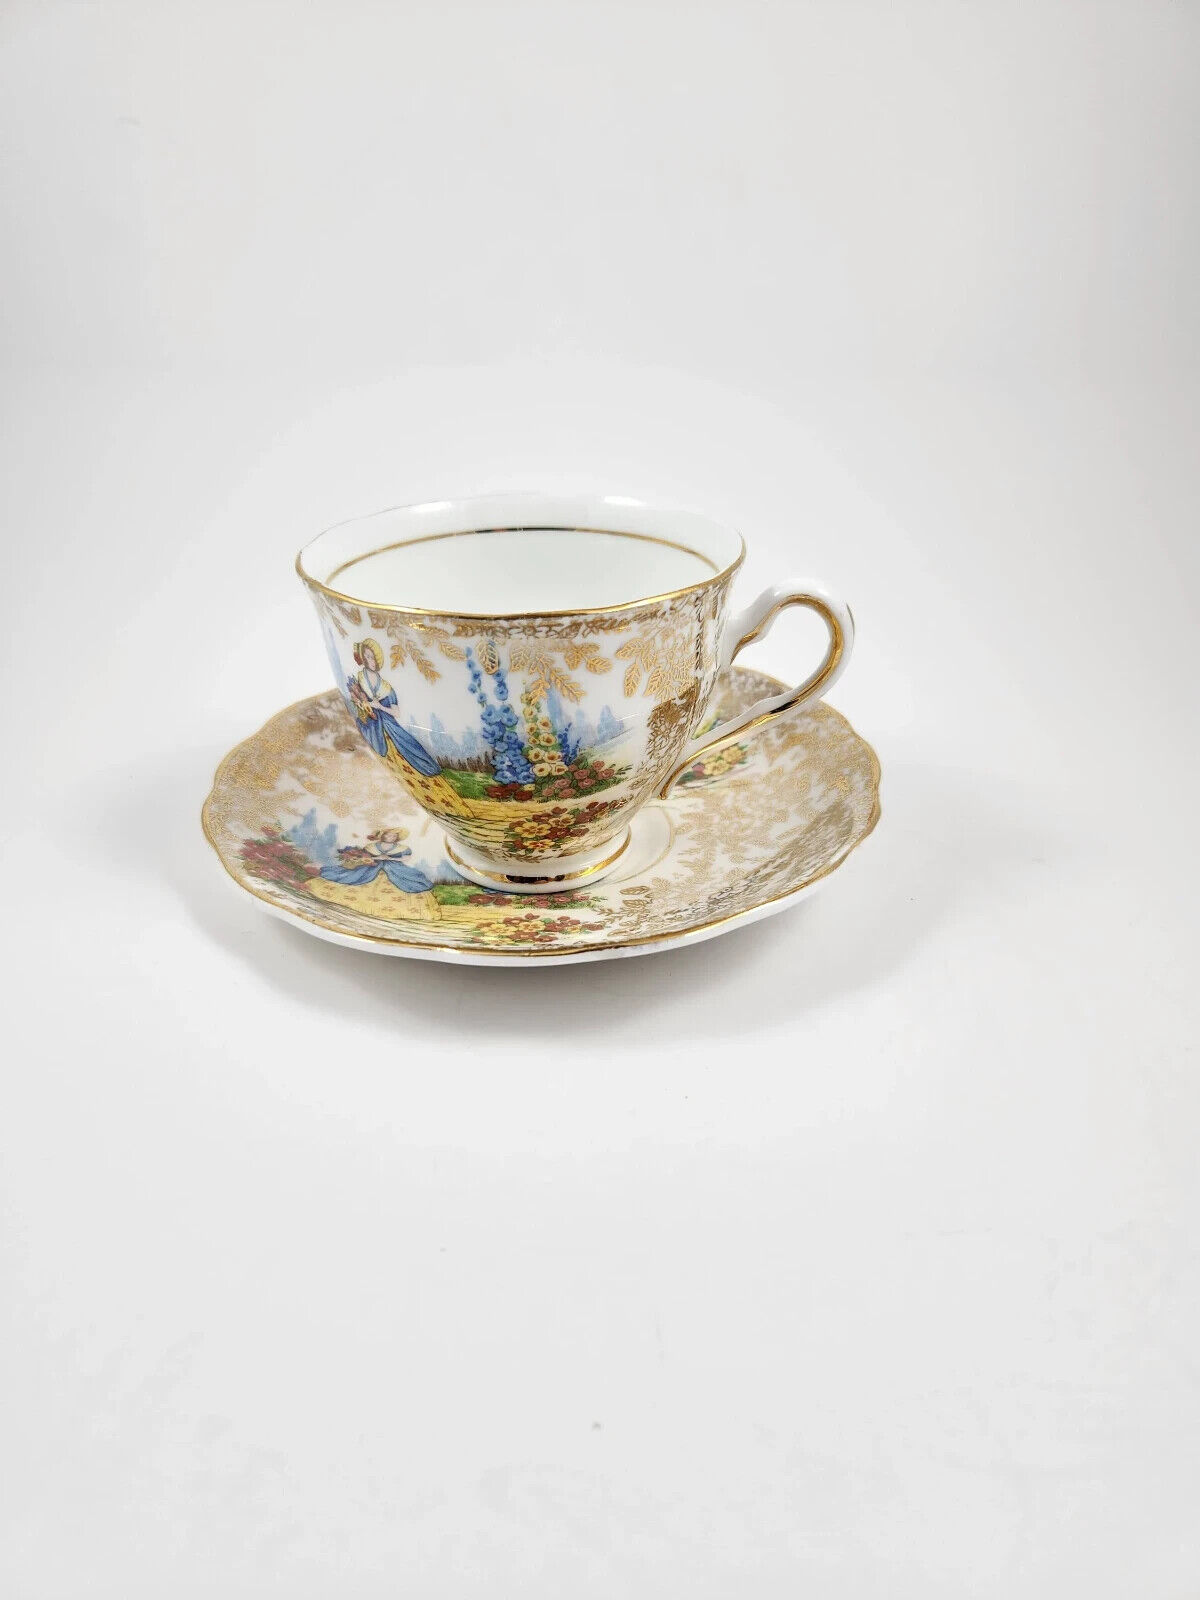 Colclough 6199 - Footed Teacup / Saucer - Featuring Crinoline Lady In A Garden